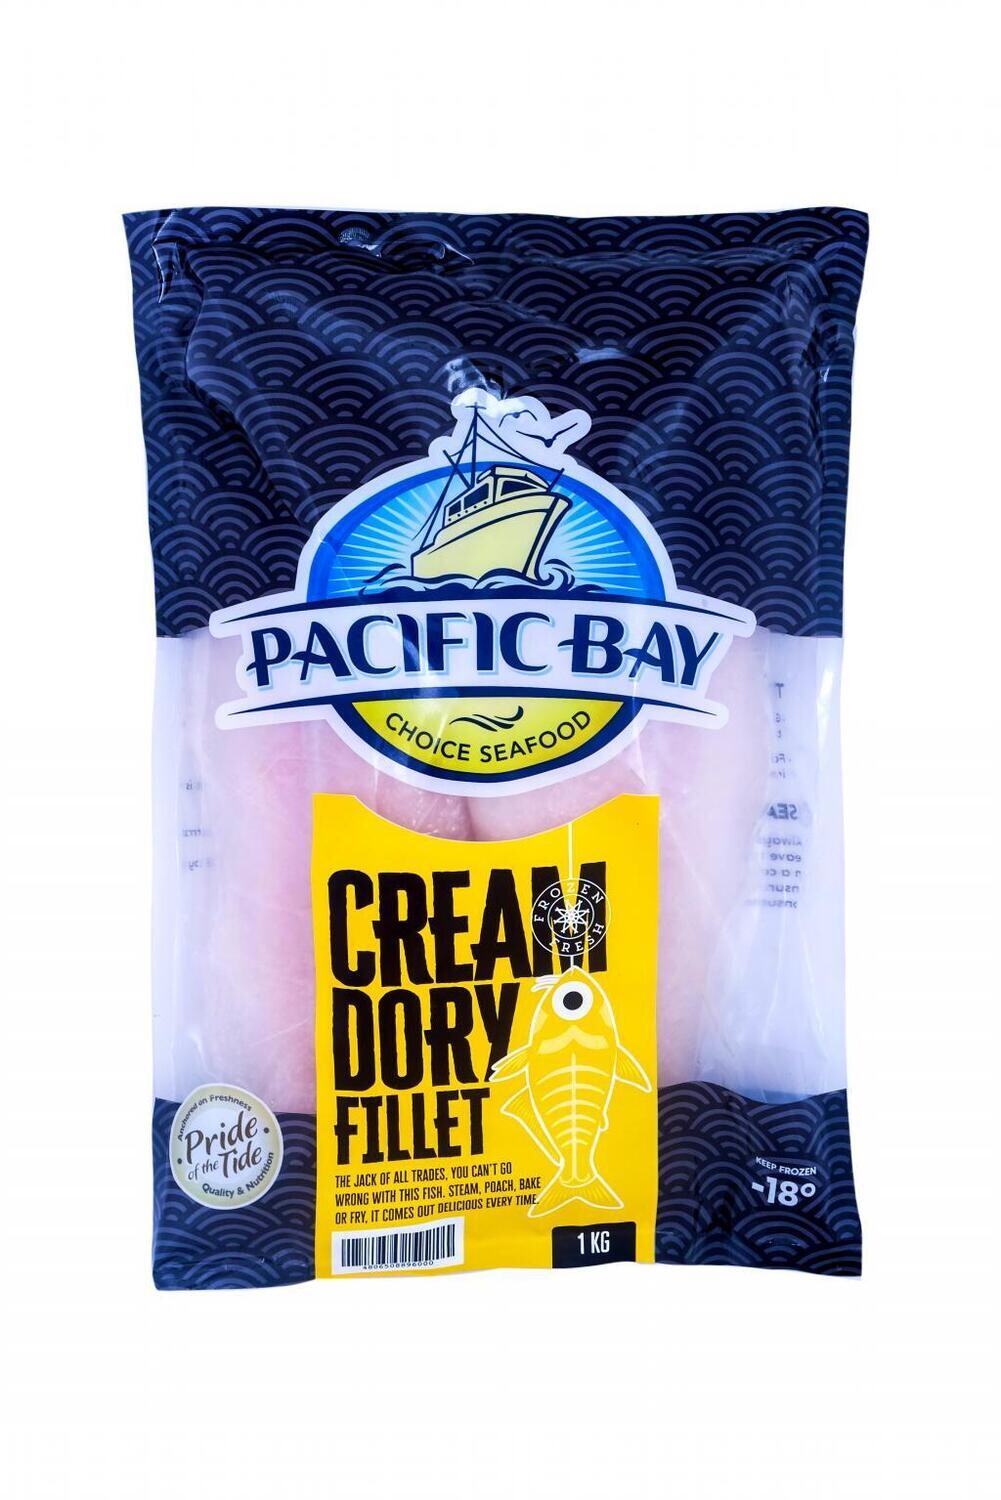 Pacific Bay PANGASIUS CREAM DORY FILLET 300g